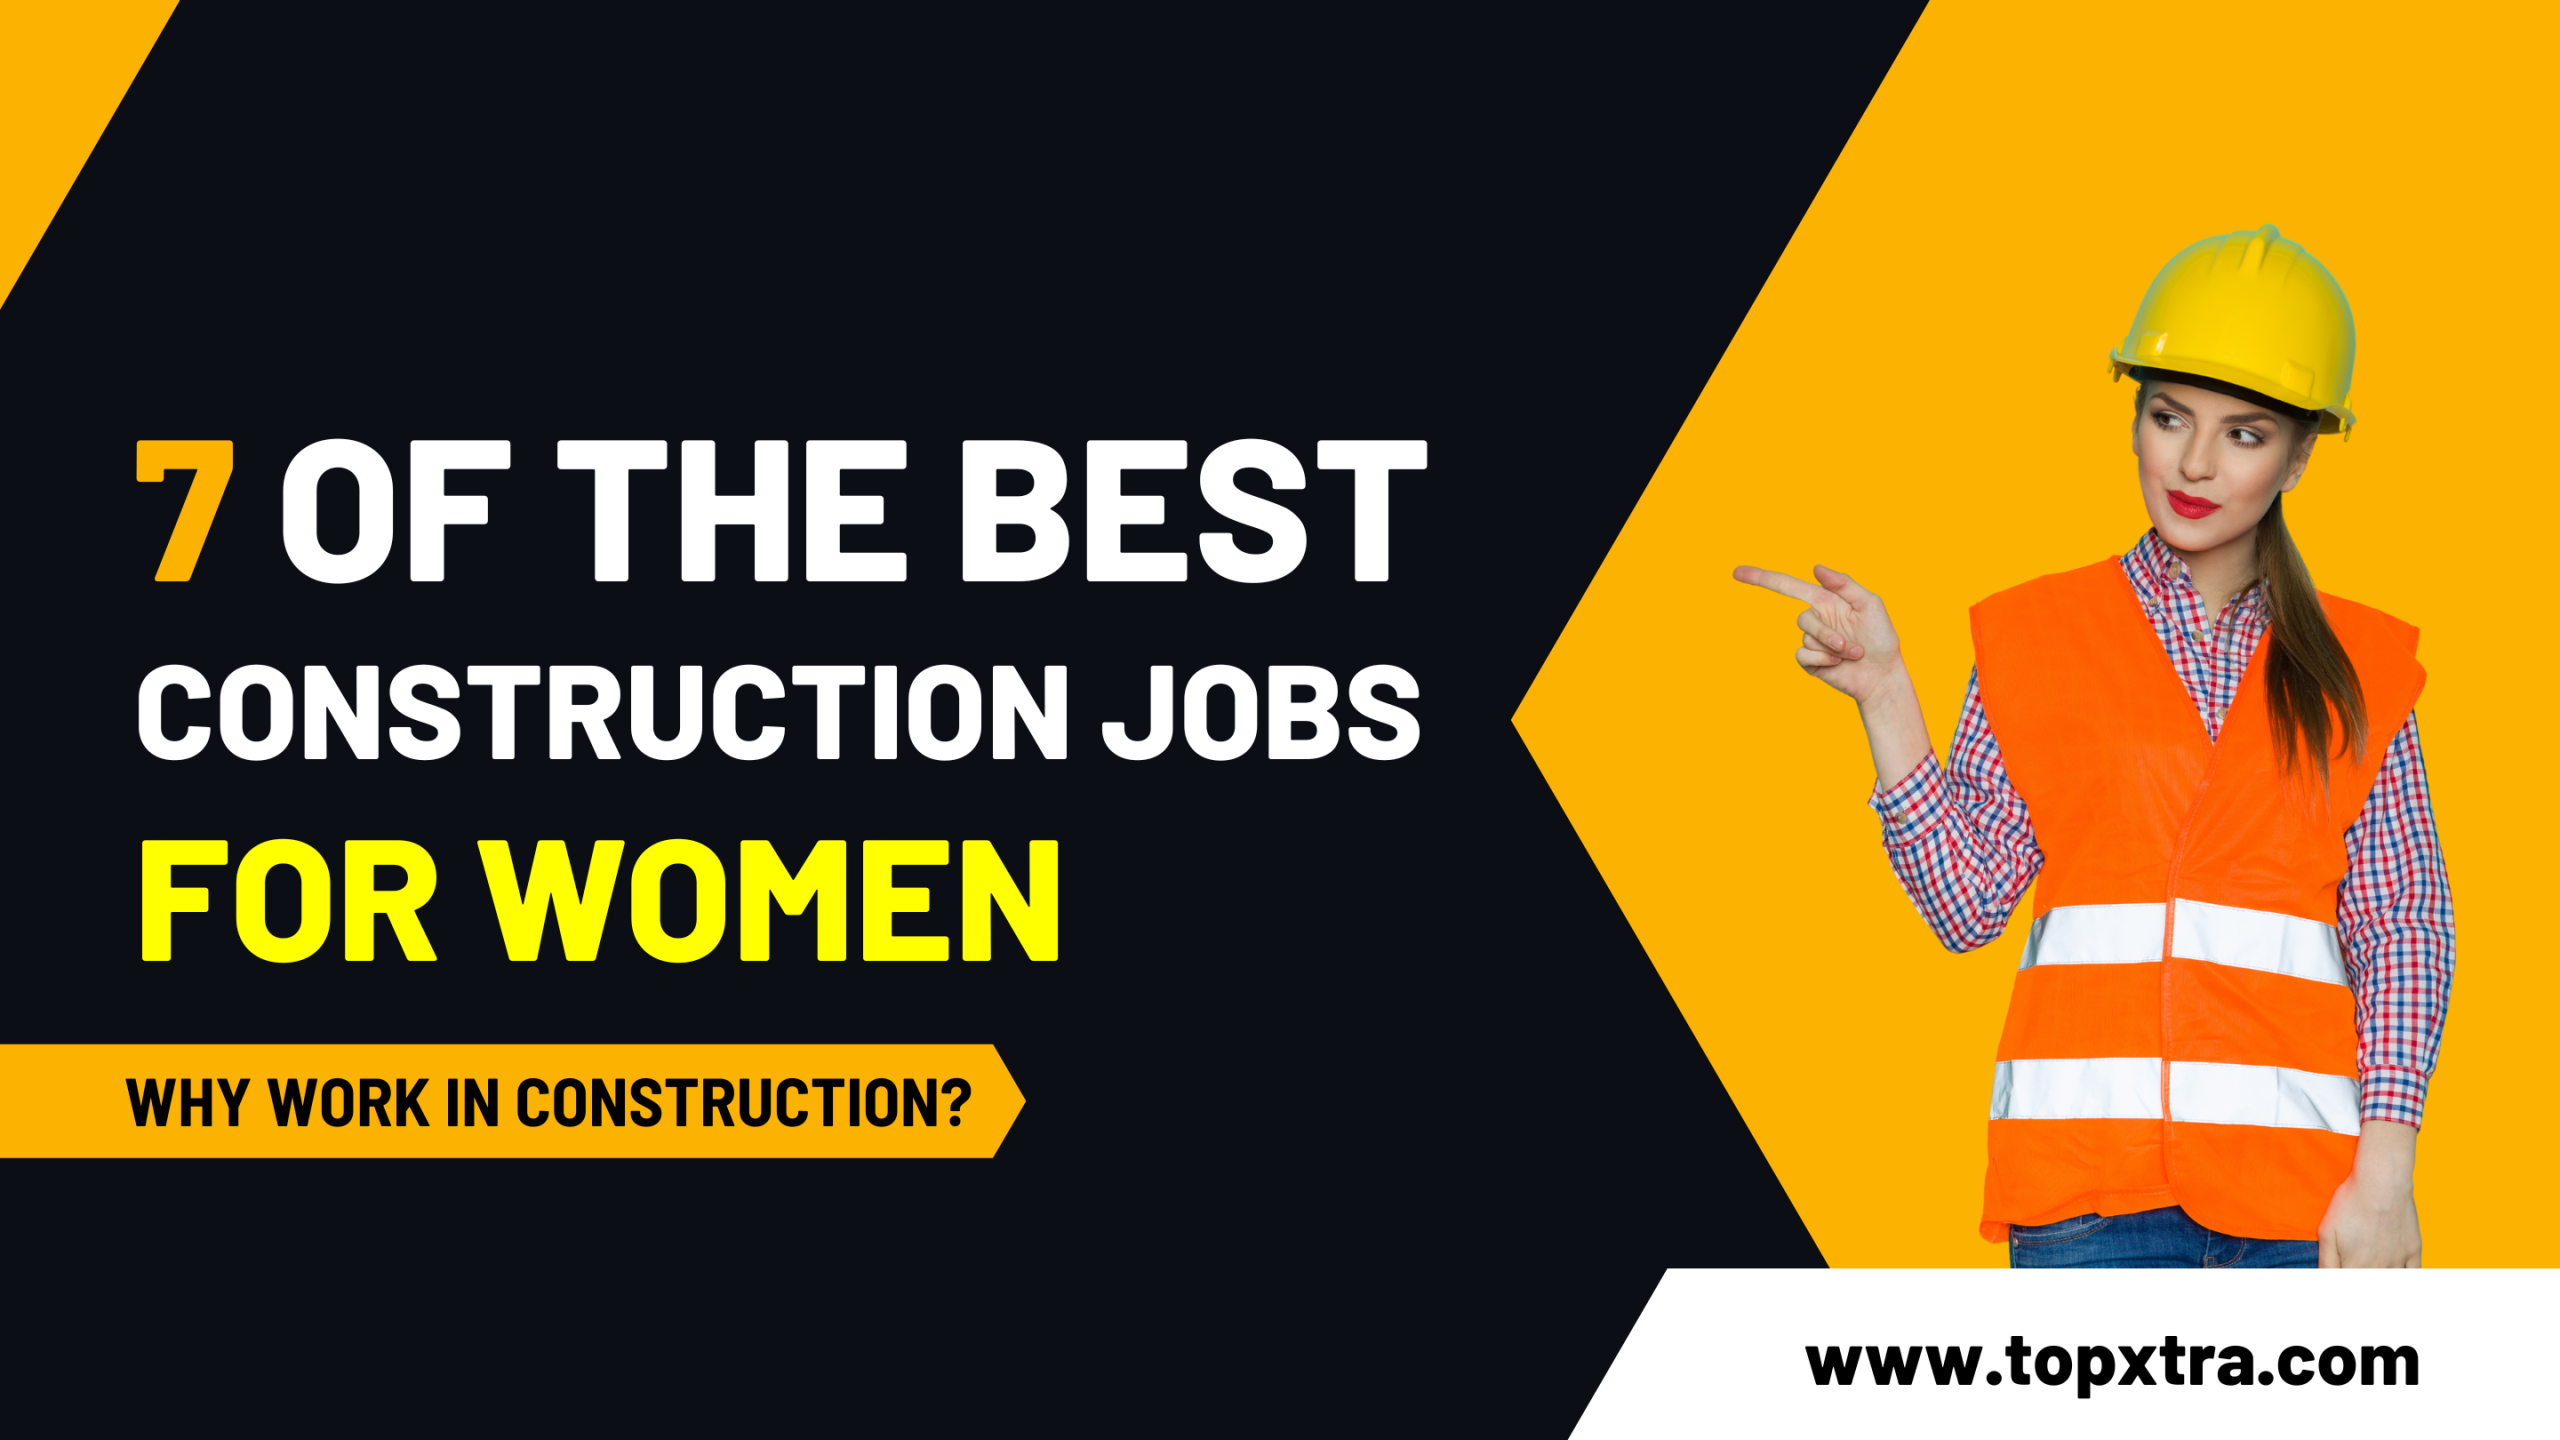 7 of the Best Construction Jobs for Women